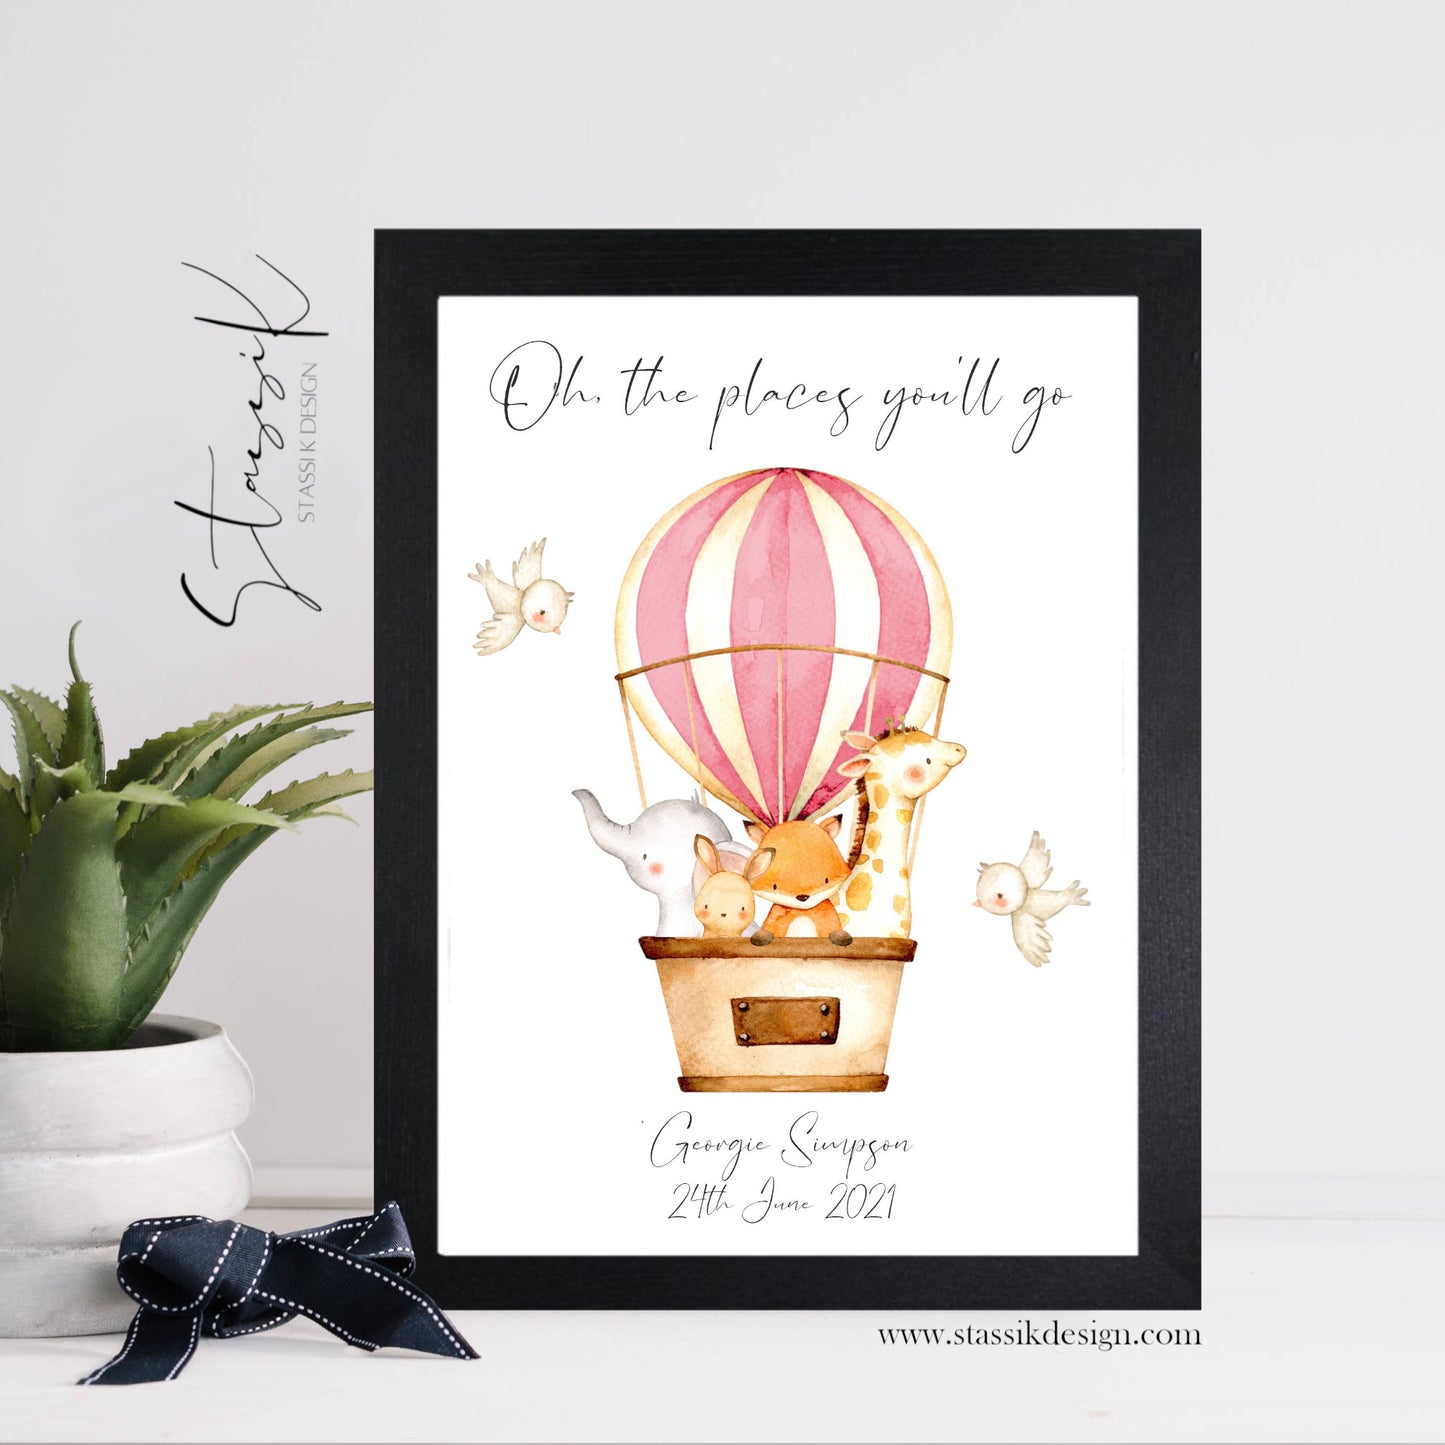 Personalised Nursery Print - 'Oh the places you'll go' - Pink